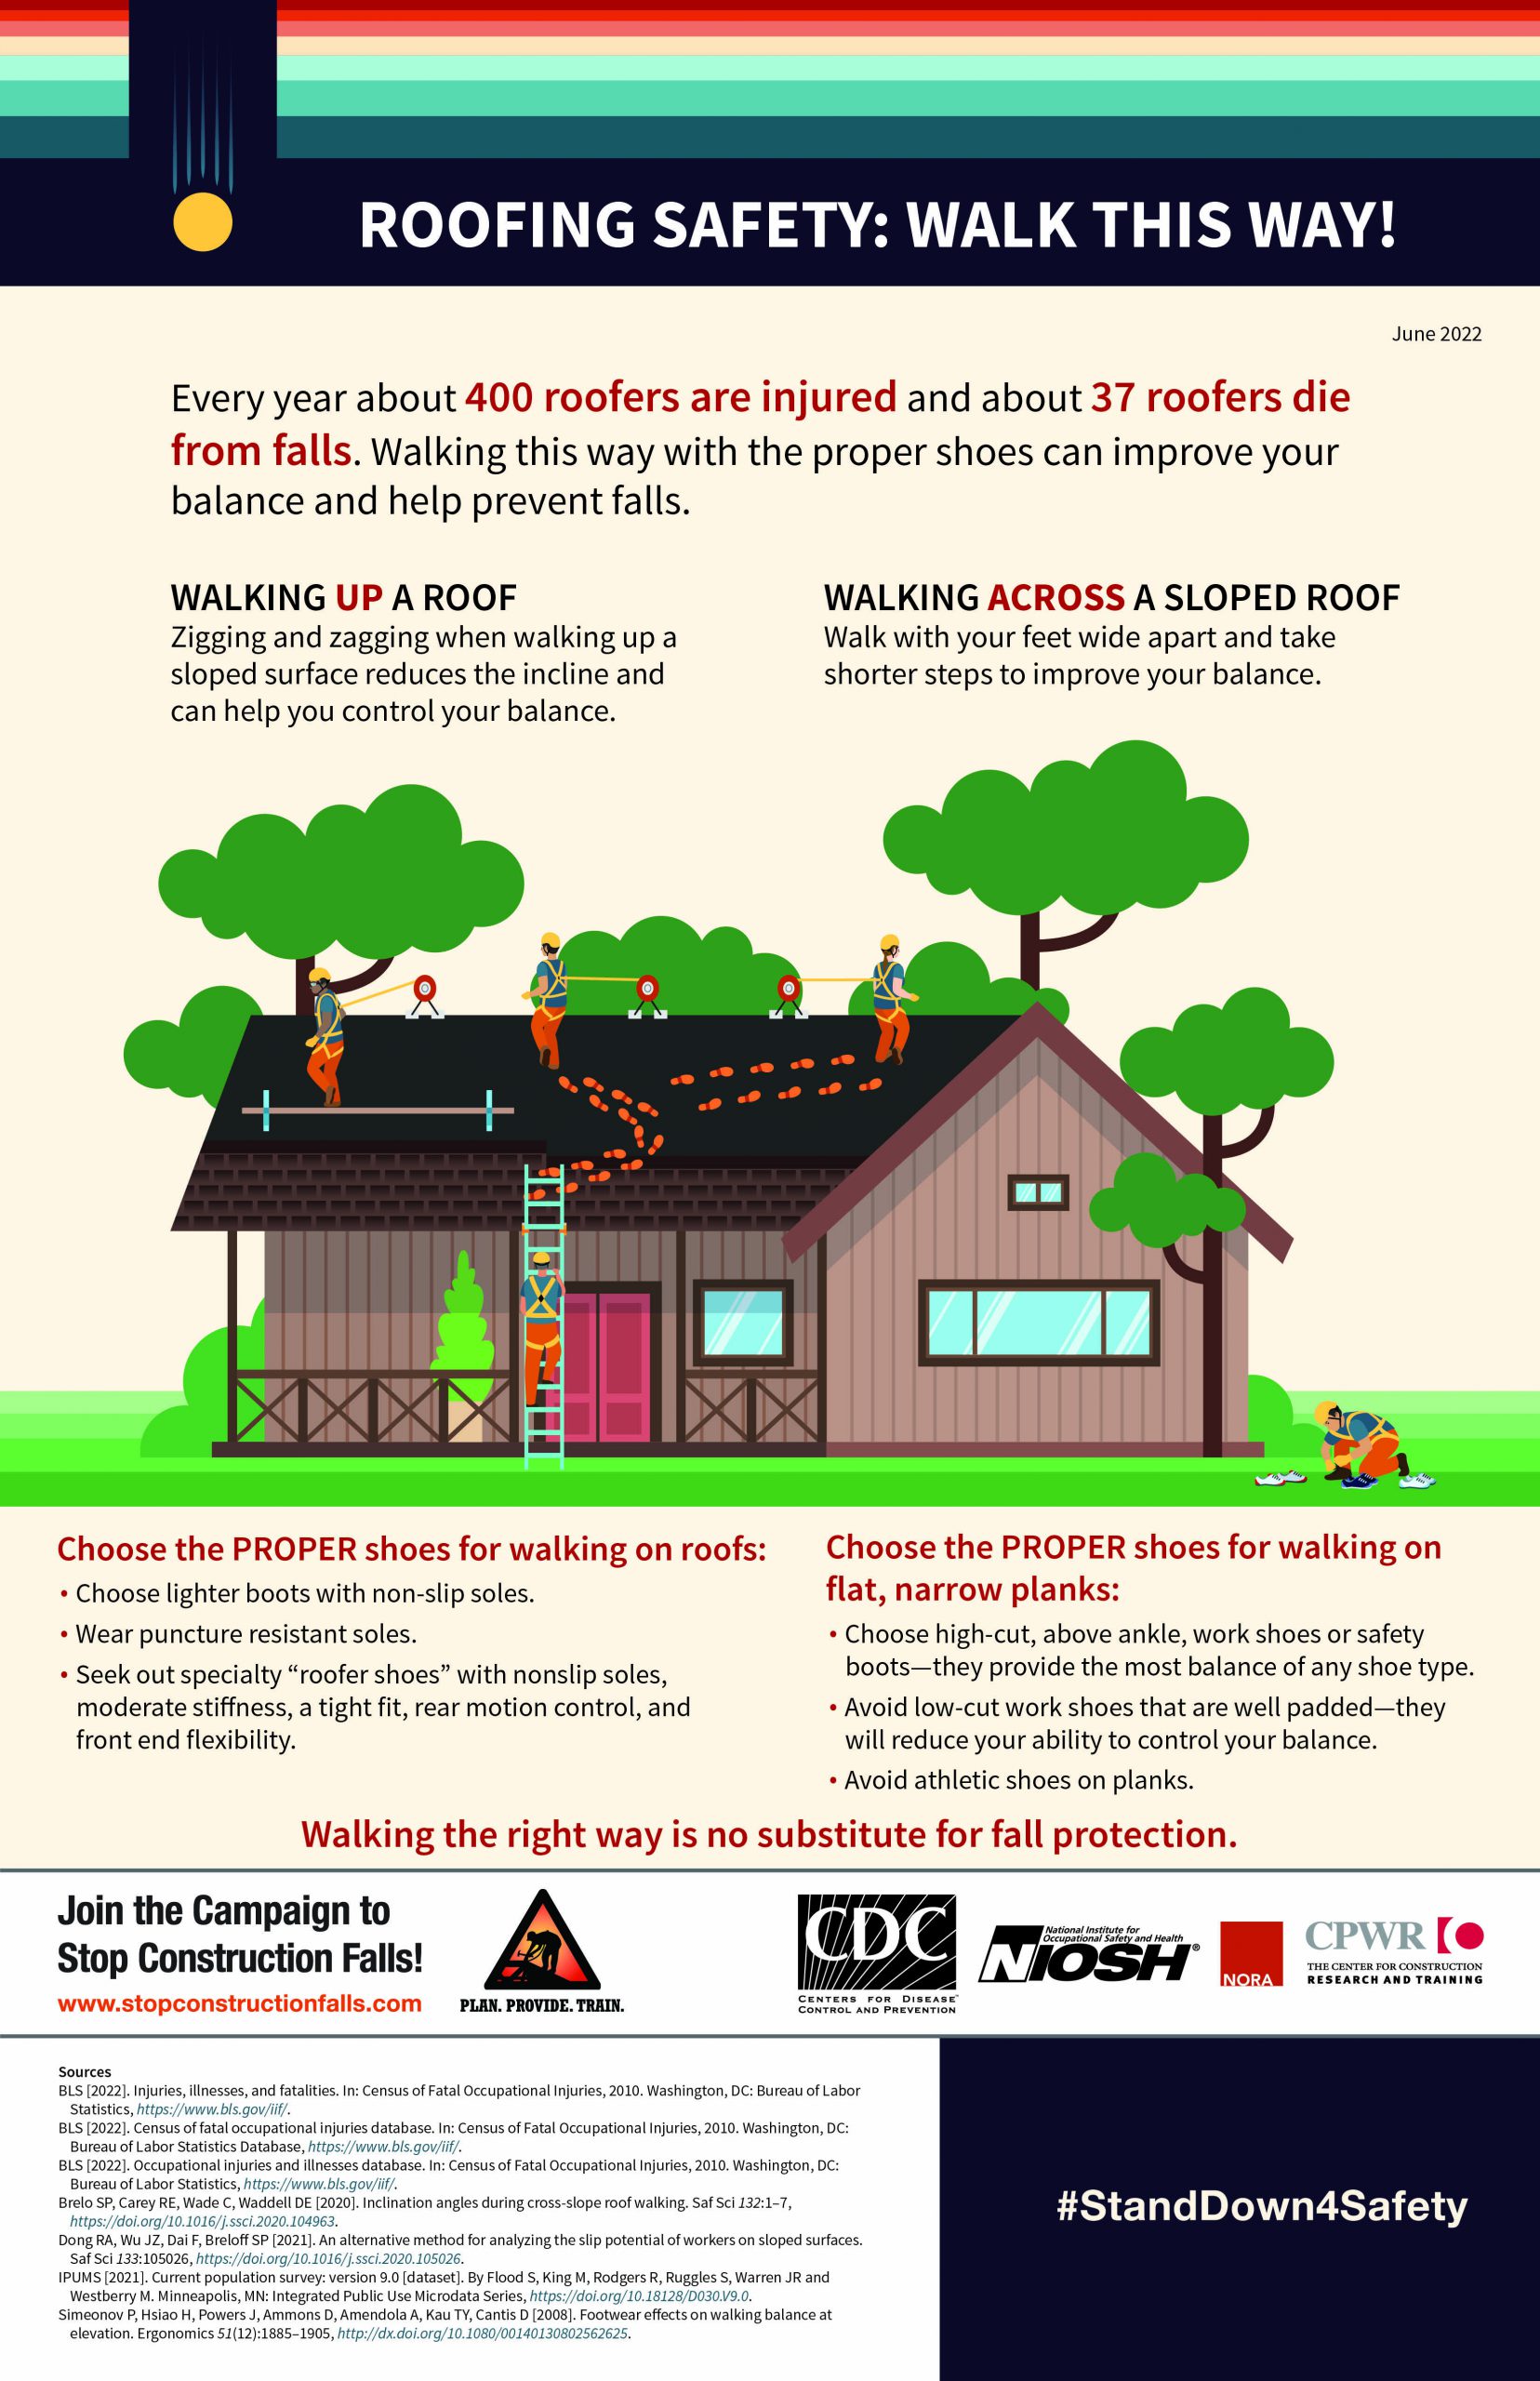 ROOFING SAFETY: WALK THIS WAY! June 2022 PDF Image